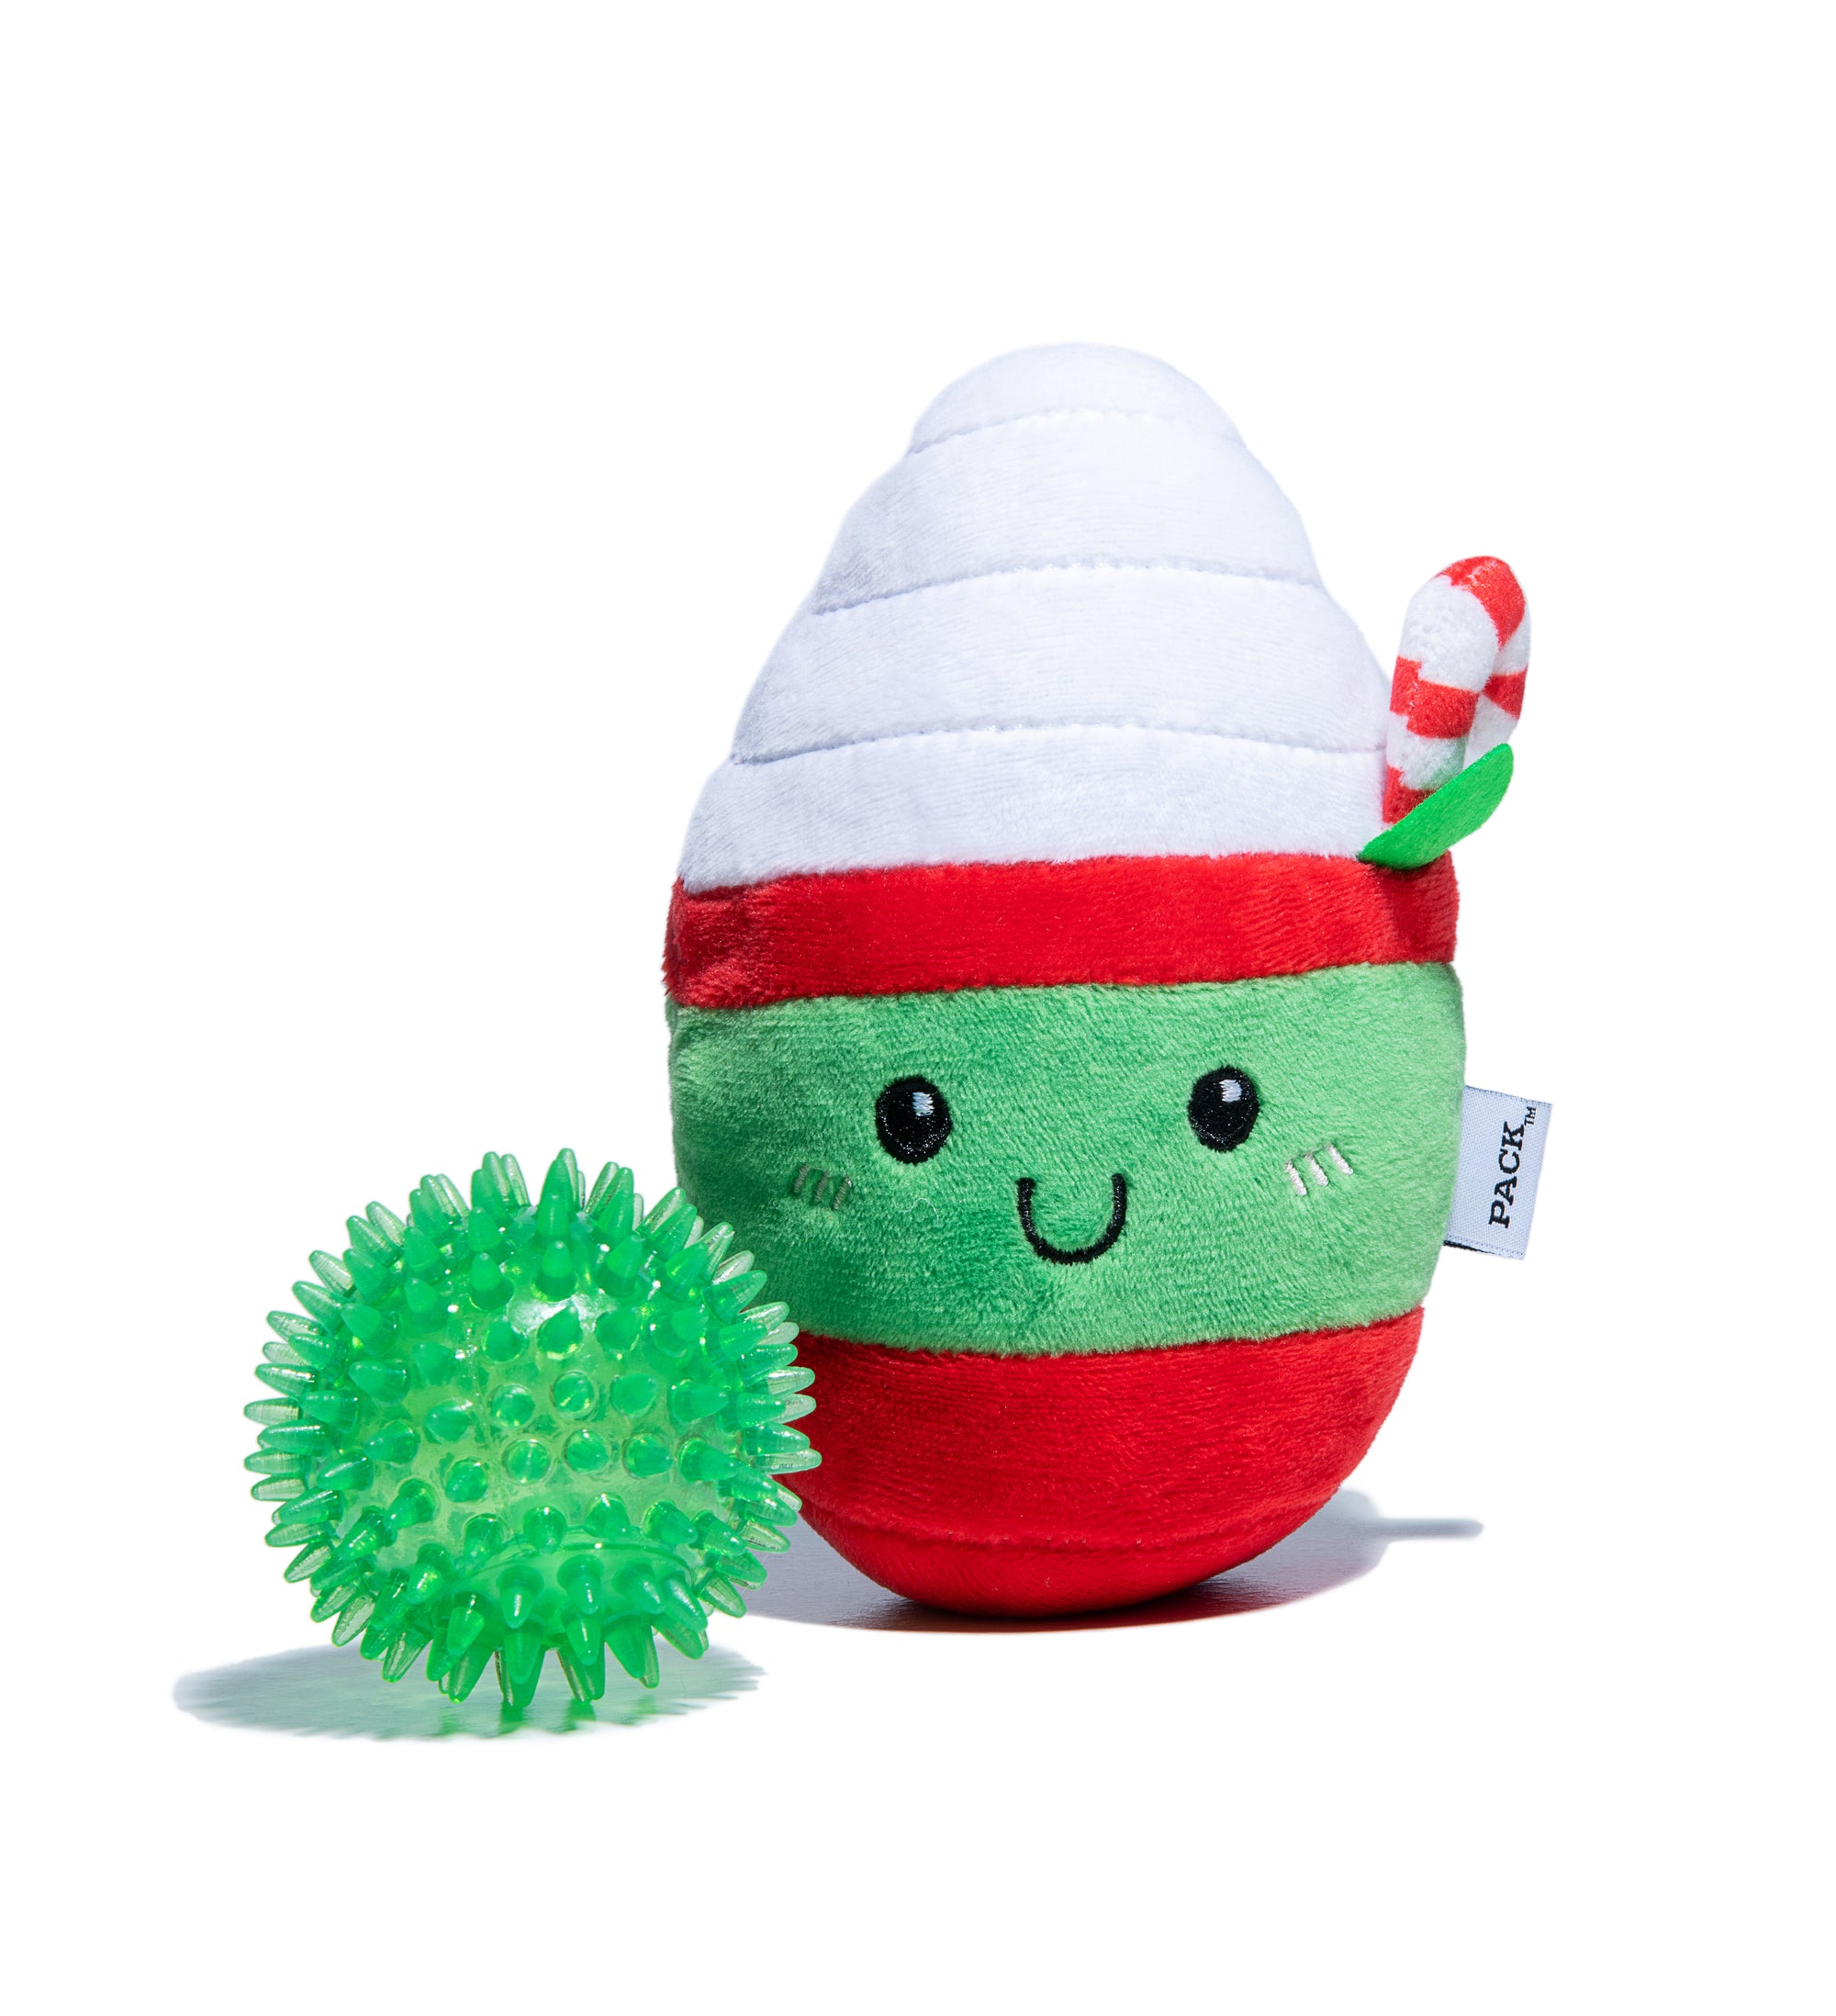 Minty Mocha (2-in-1 Toy) - Free Product